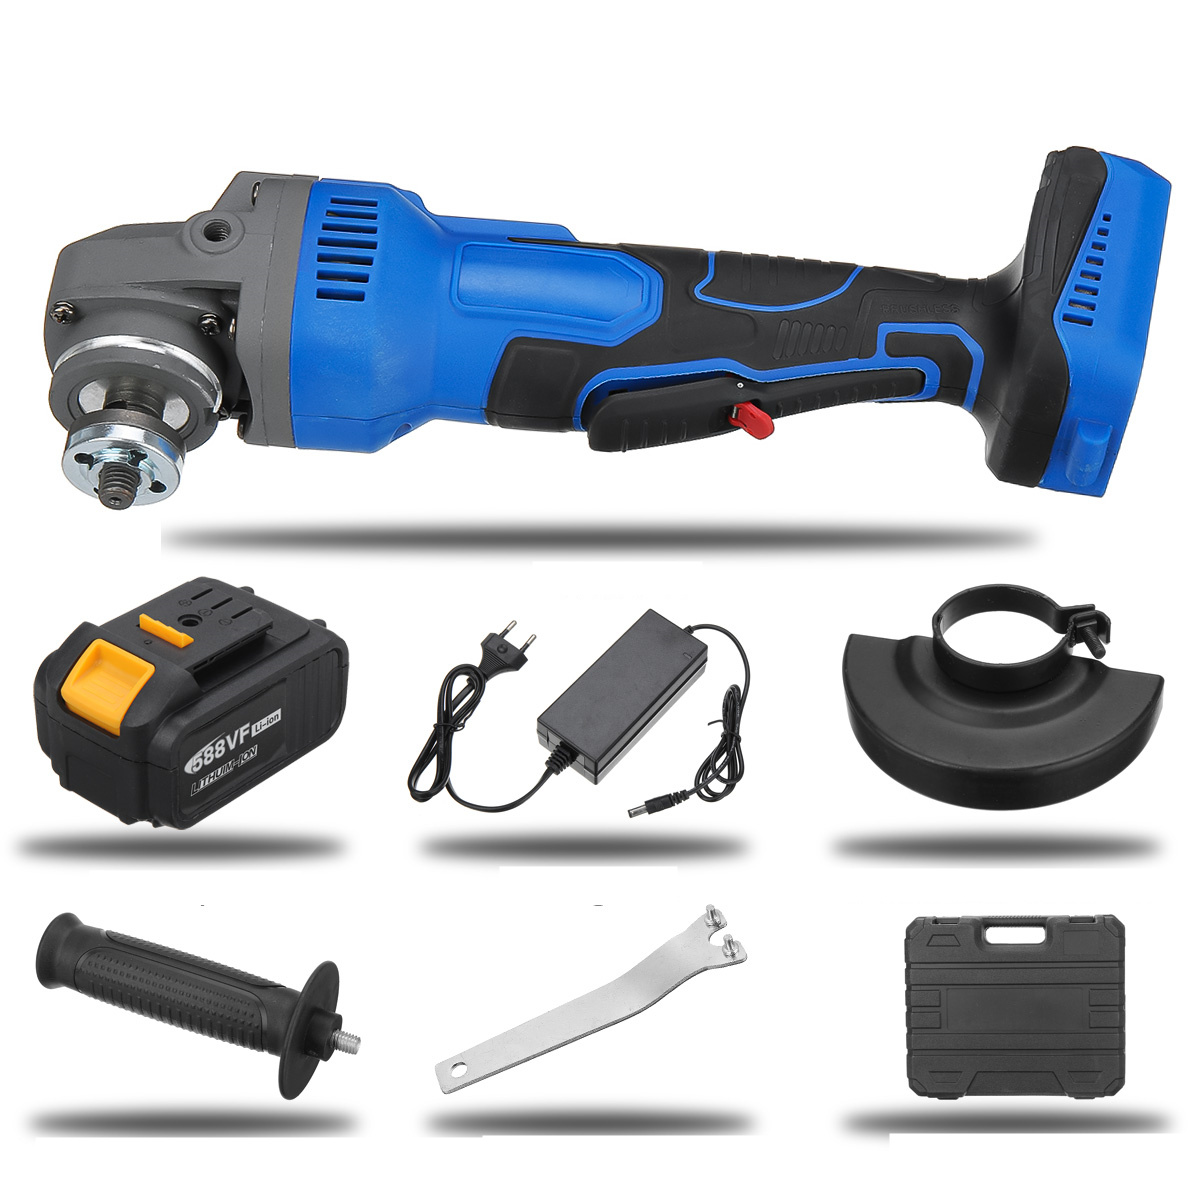 588VF-Cordless-Brushless-100mm-1580W-Electric-Angle-Grinder-3-Gears-Adjustable-Grinding-Machine-Poli-1941456-22